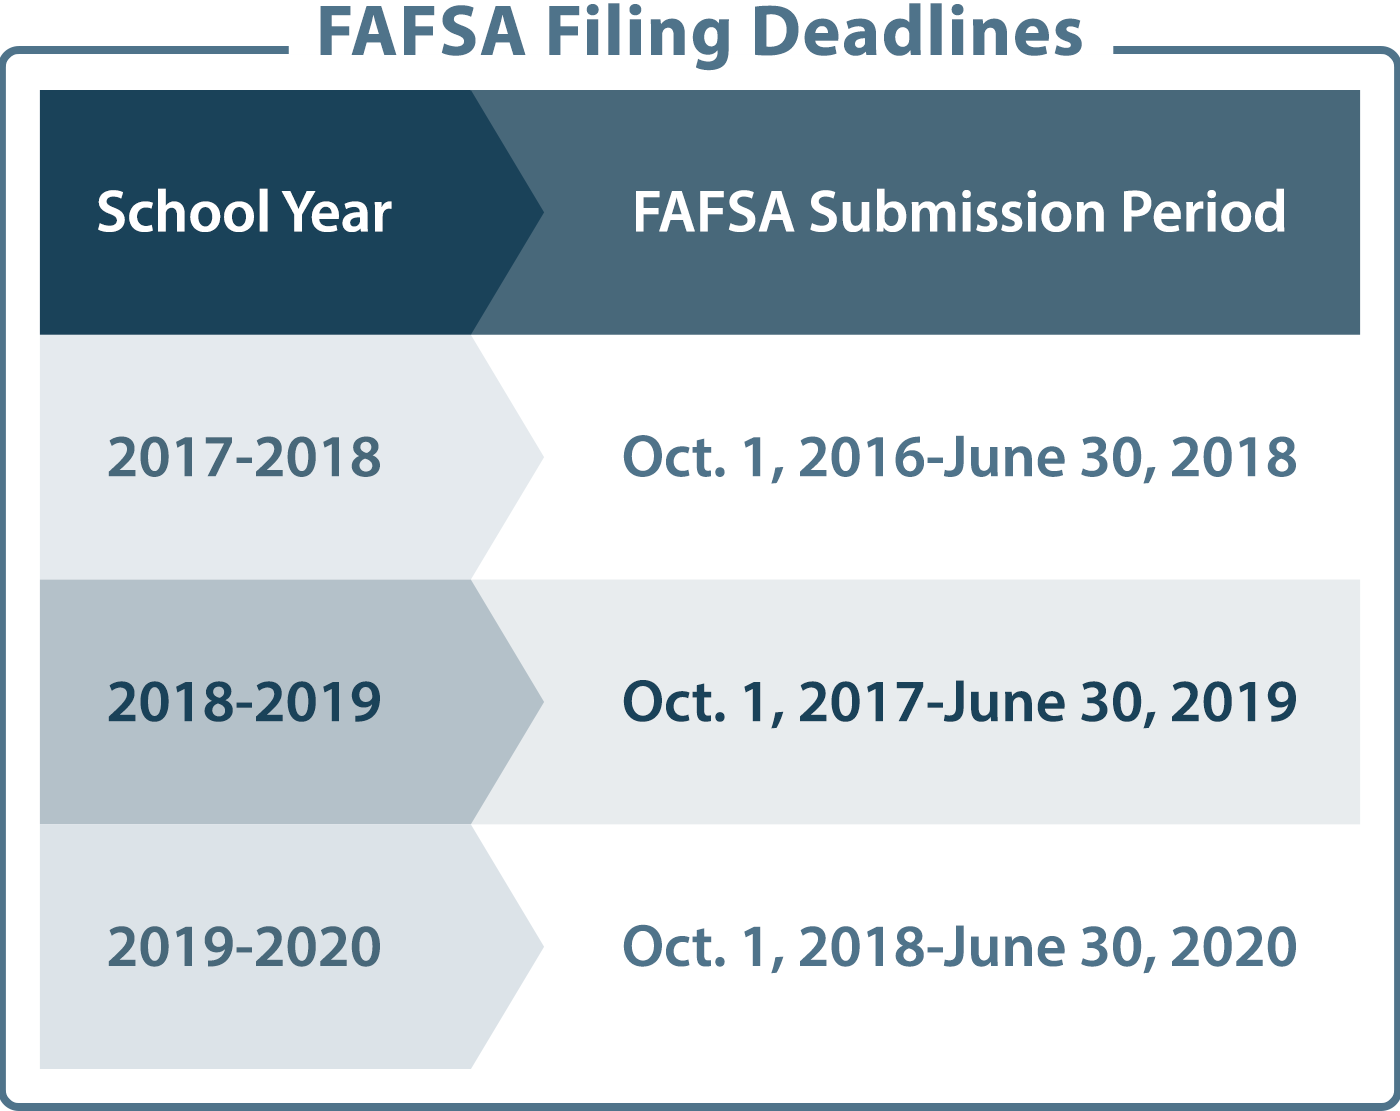 graphic describes the FAFSA filing deadlines